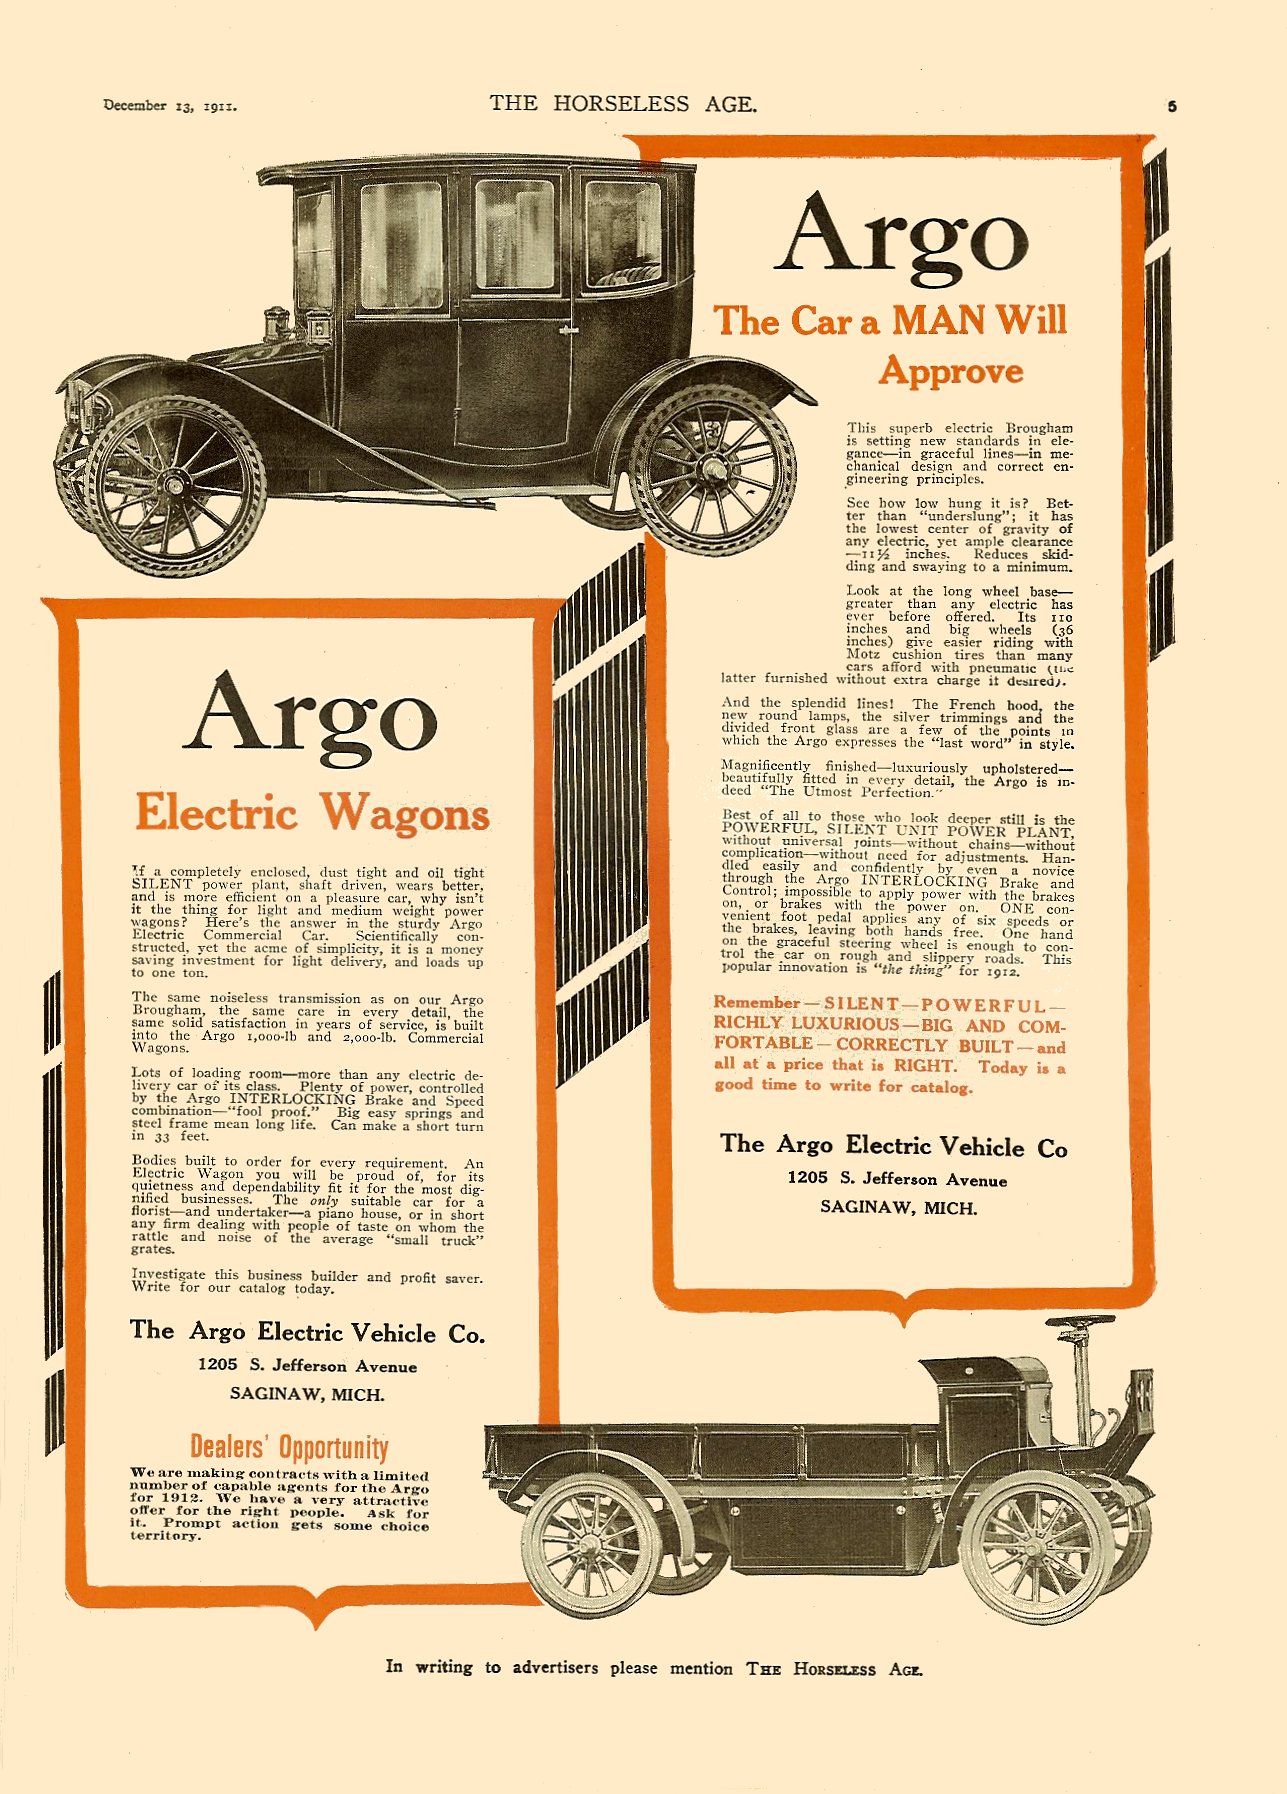 1911 12 13 Argo Electric Wagons The Argo Electric Vehicle Co. Saginaw, MICH The Horseless Age magazine Vol. 28, No. 24 December 13, 1911 9″x12″ page 5